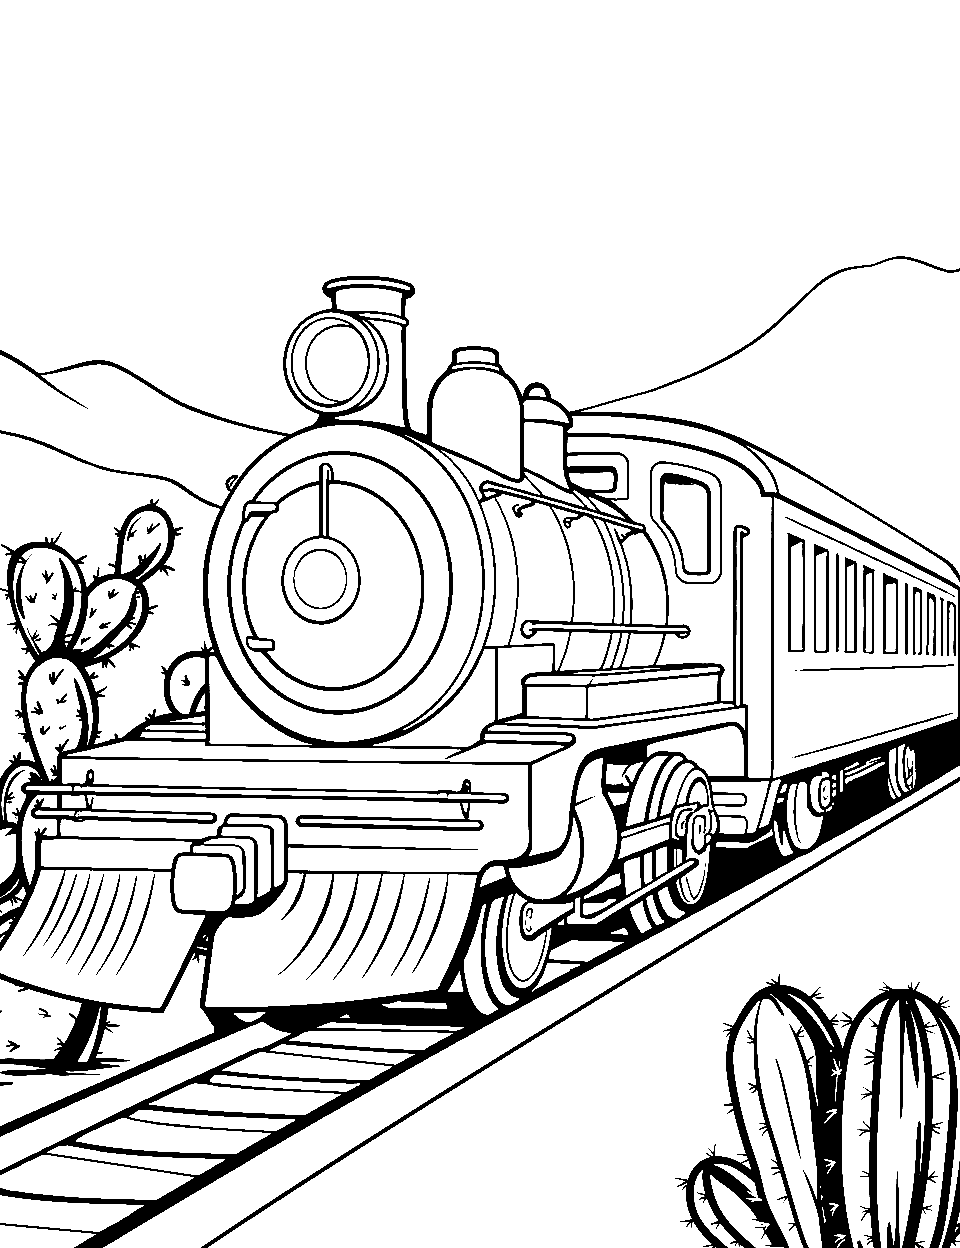 Train in Desert Coloring Page - A steam engine train cruising through the desert.